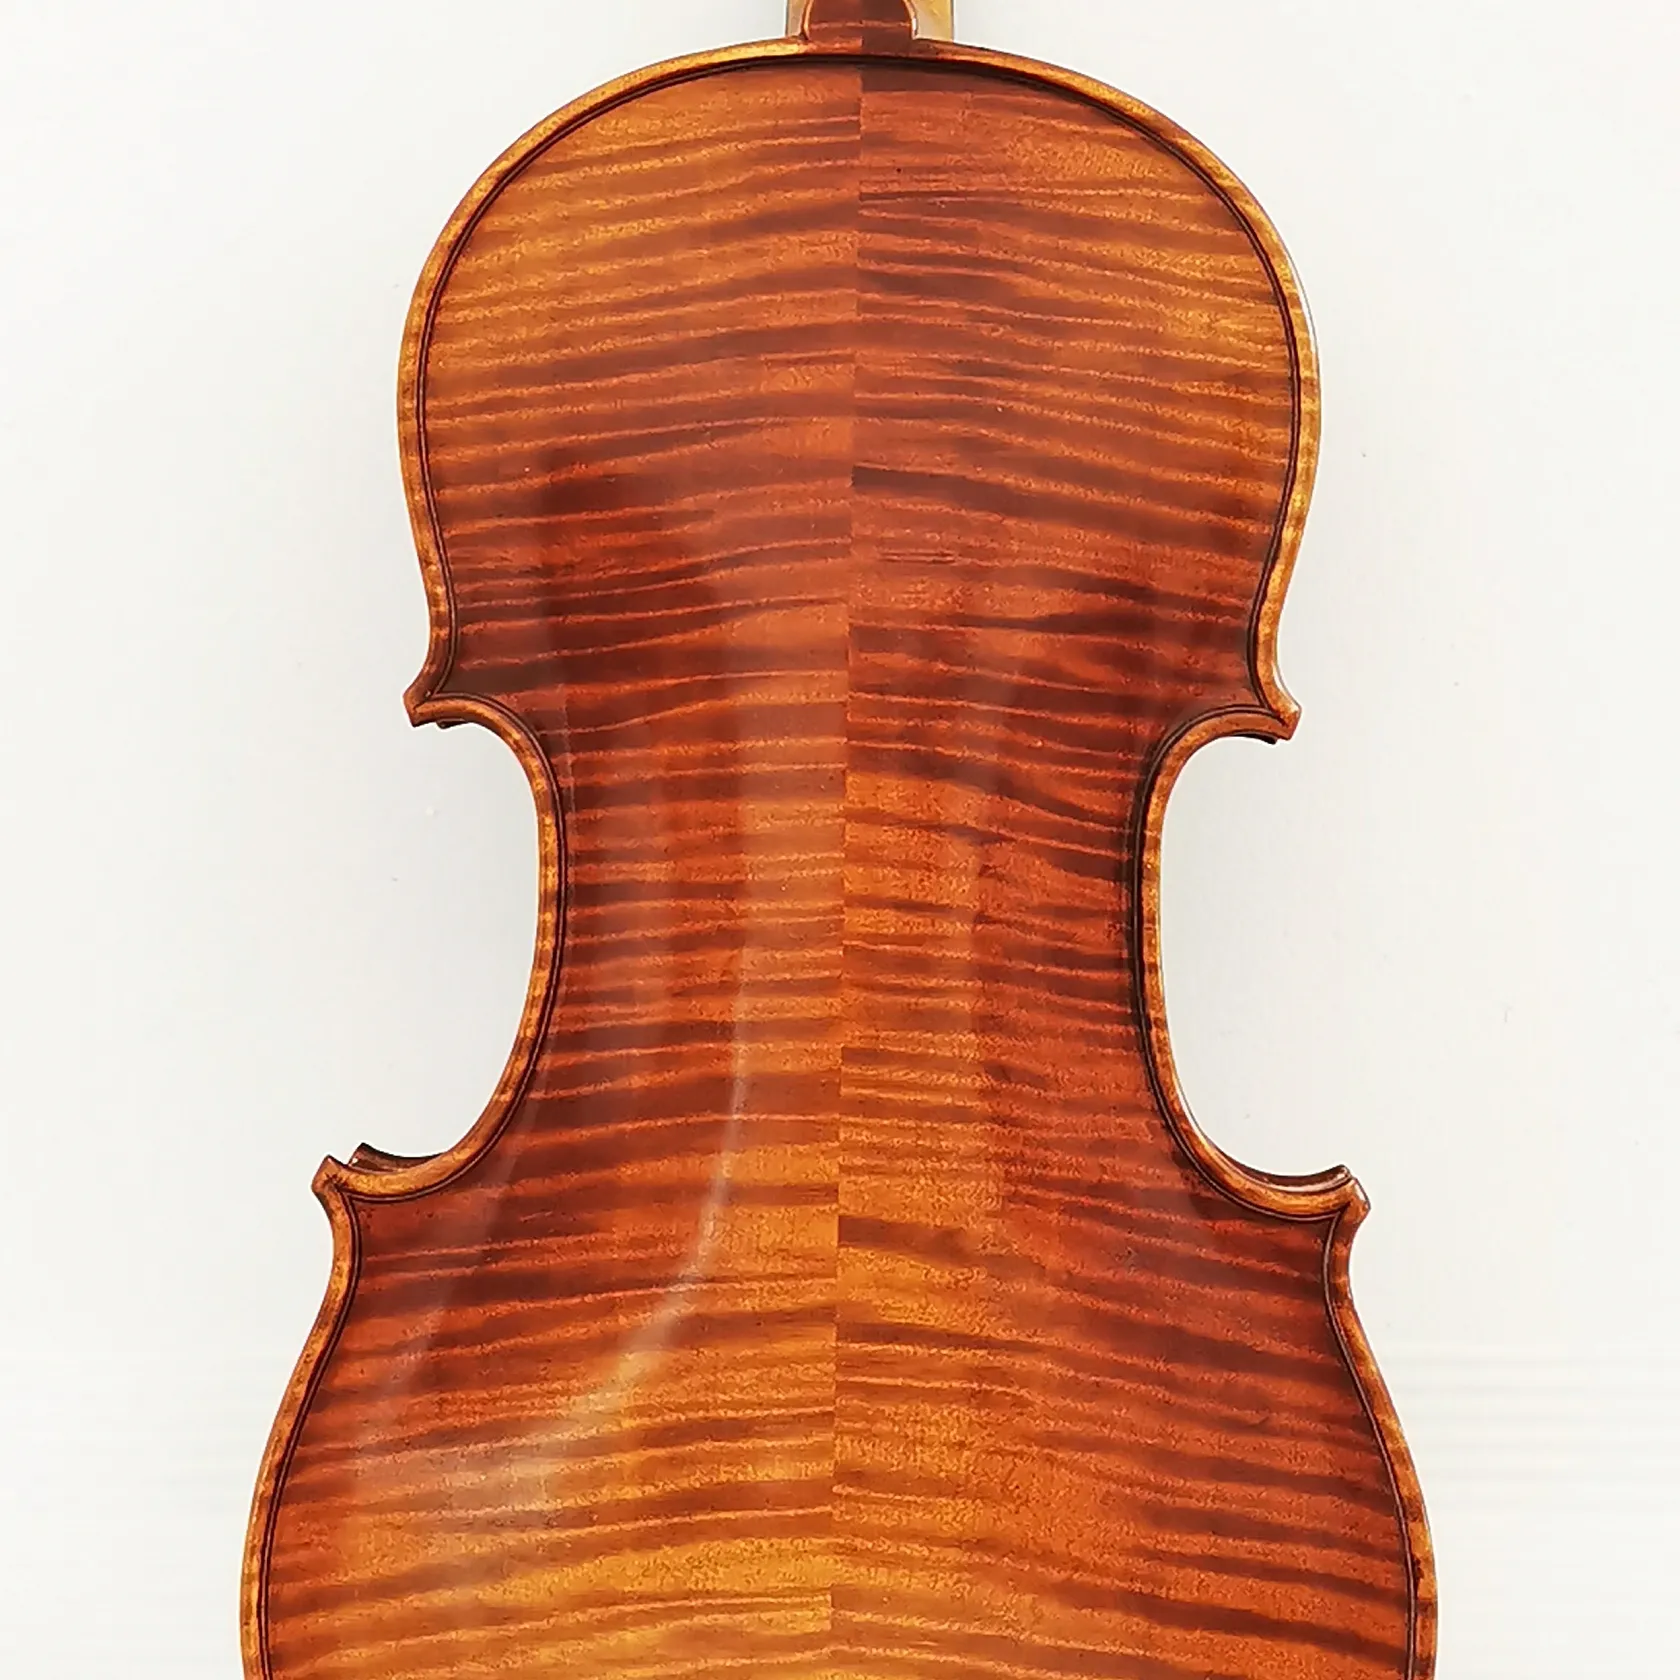 Famous Brand Strings Instrument 3/4 Popular Handmade Violin Made in China